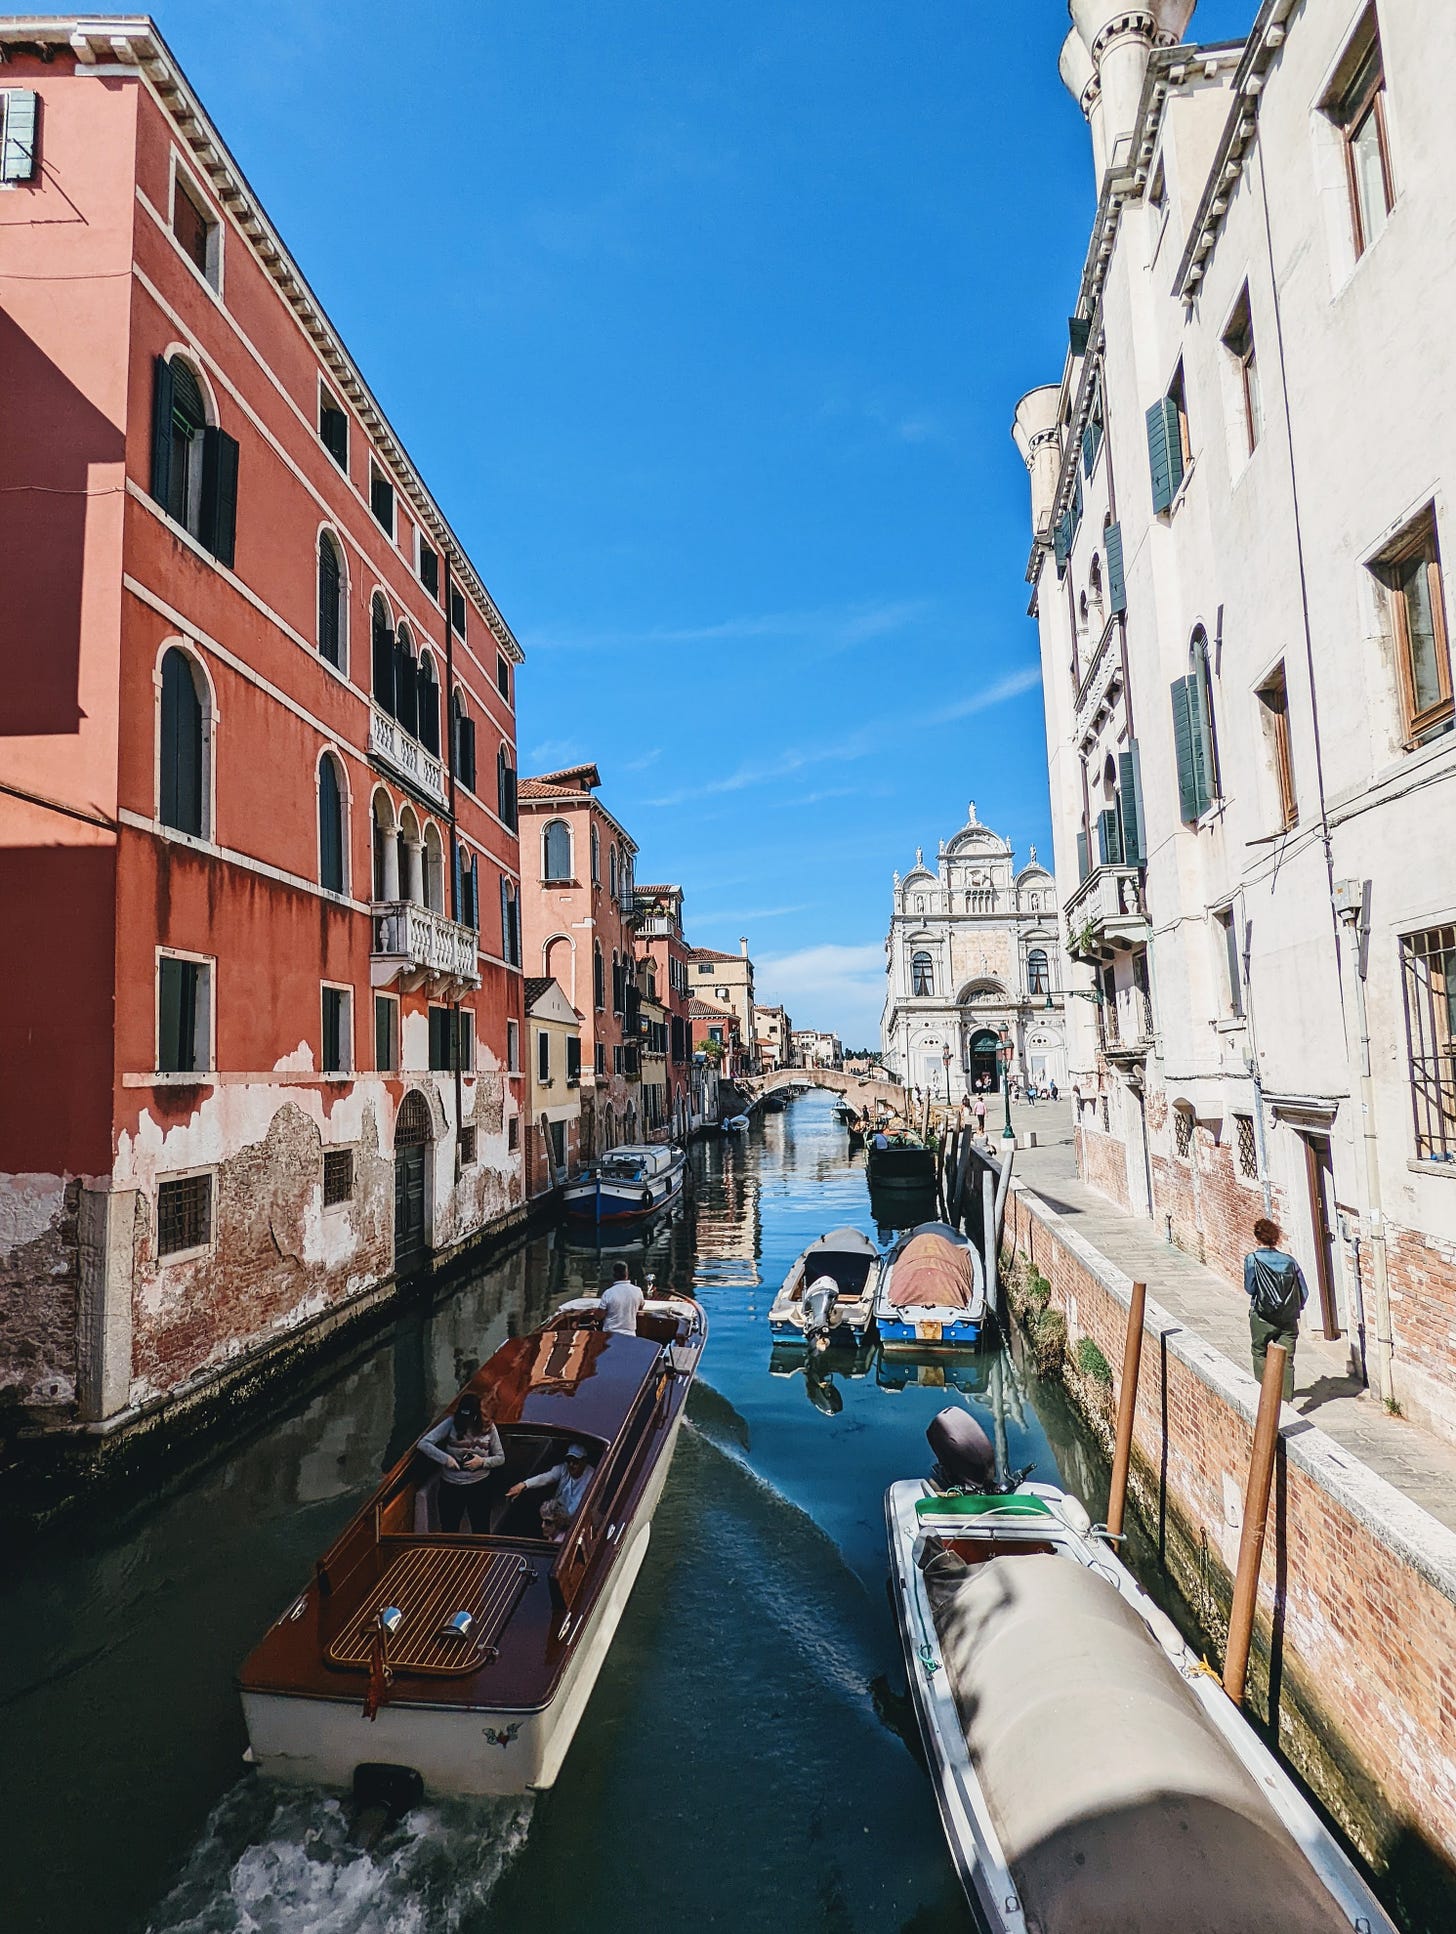 A canal in Venice, Italy during my first-ever trip to Europe. Blue skies hang over aged buildings and a narrow canal filled with small boats.